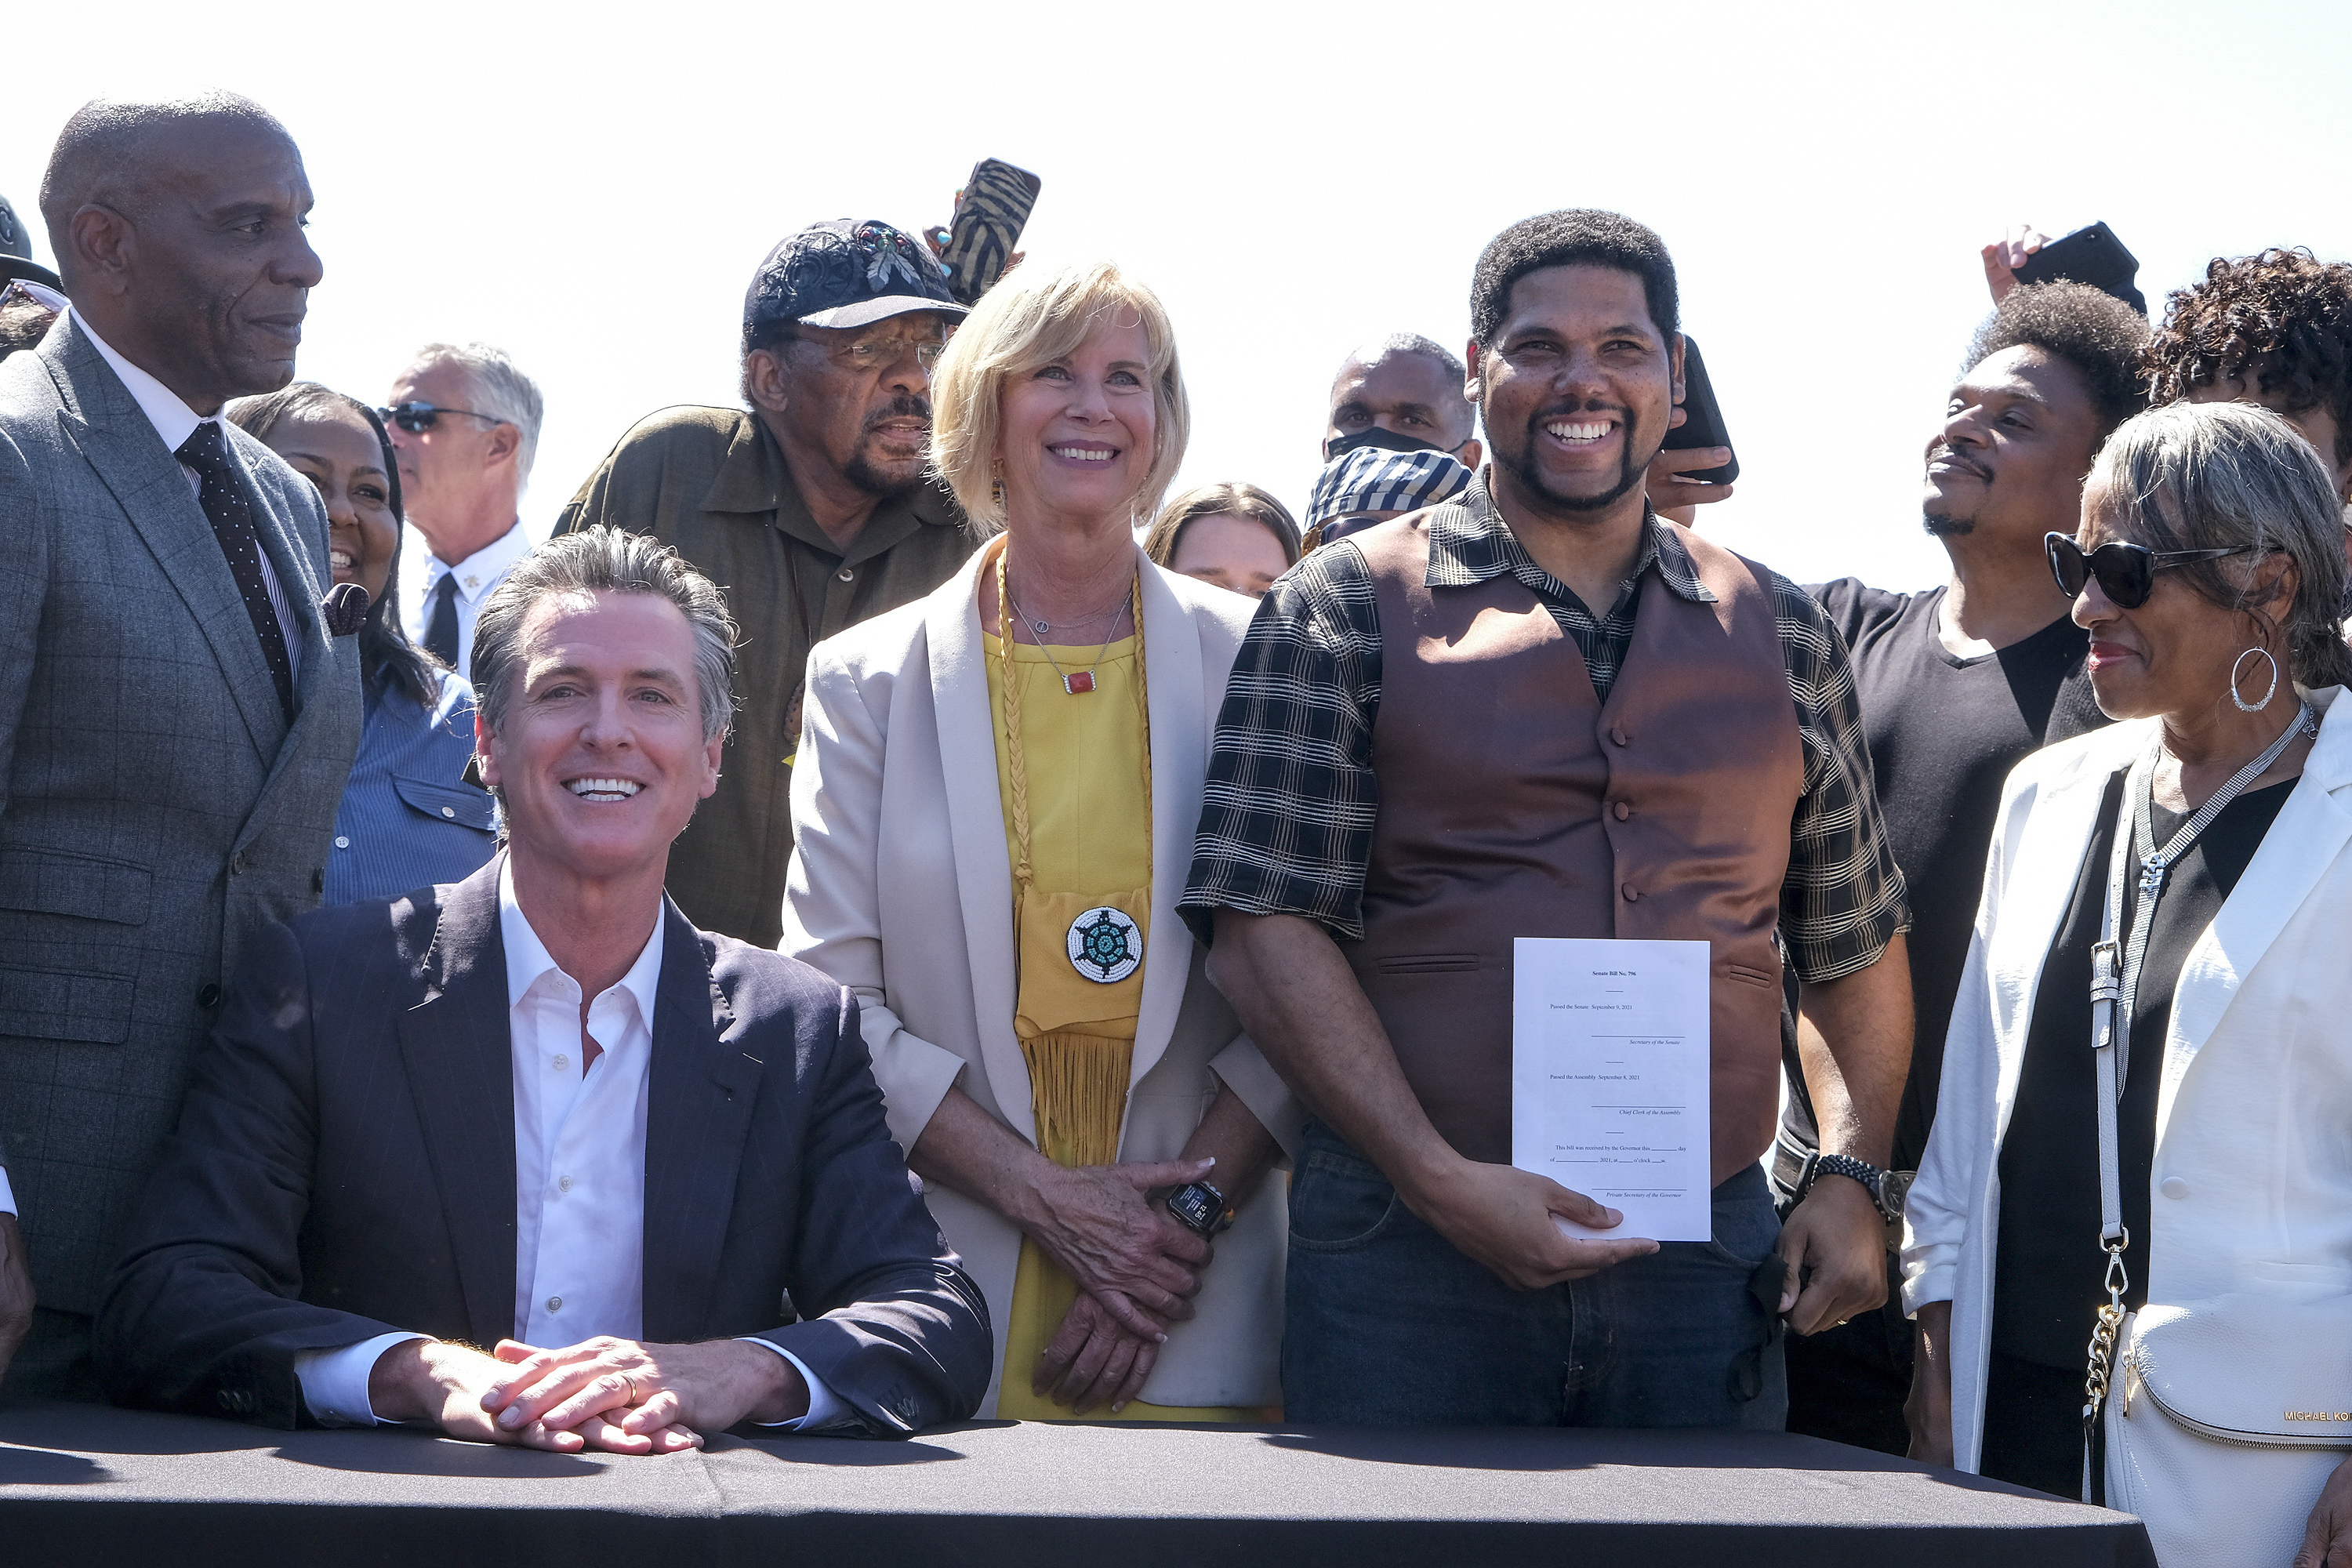 Group of people standing around California Governor Gavin Newsom, who is seated, smiling. Man holding a white document next to Newsom.